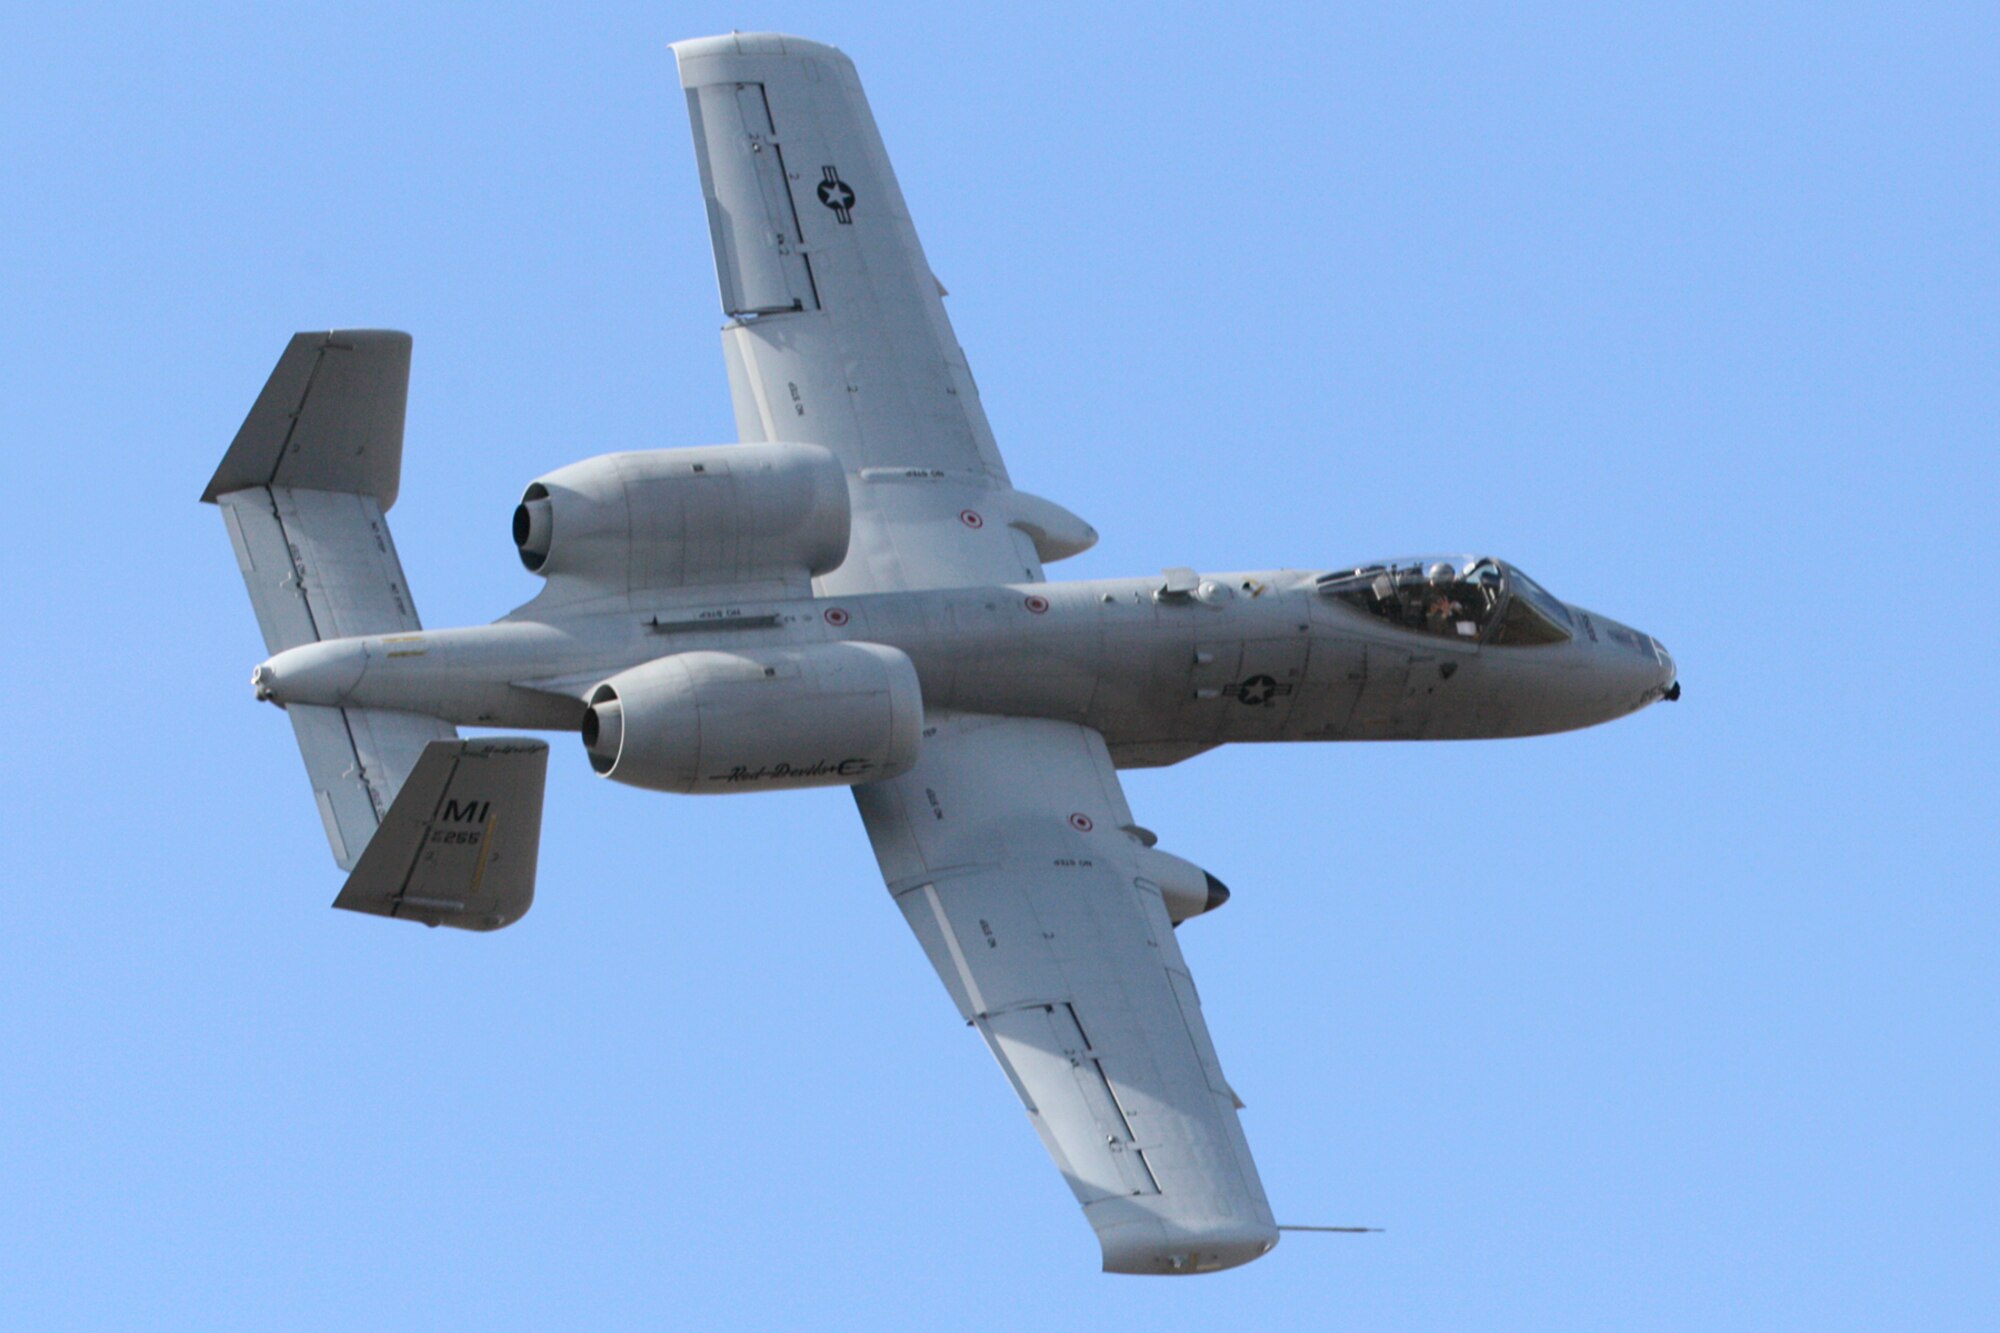 An A-10 Thunderbolt II, flown by the 107th Fighter Squadron, flies over the Barry M. Goldwater Air Force Range, west of Tucson, Ariz., on a training mission on Feb. 2, 2015. The 107th and supporting elements from the 127th Wing, Michigan Air National Guard, is on a two-week training exercise at nearby Davis-Monthan Air Force Base, Ariz. (U.S. Air National Guard photo by Tech. Sgt. Dan Heaton)